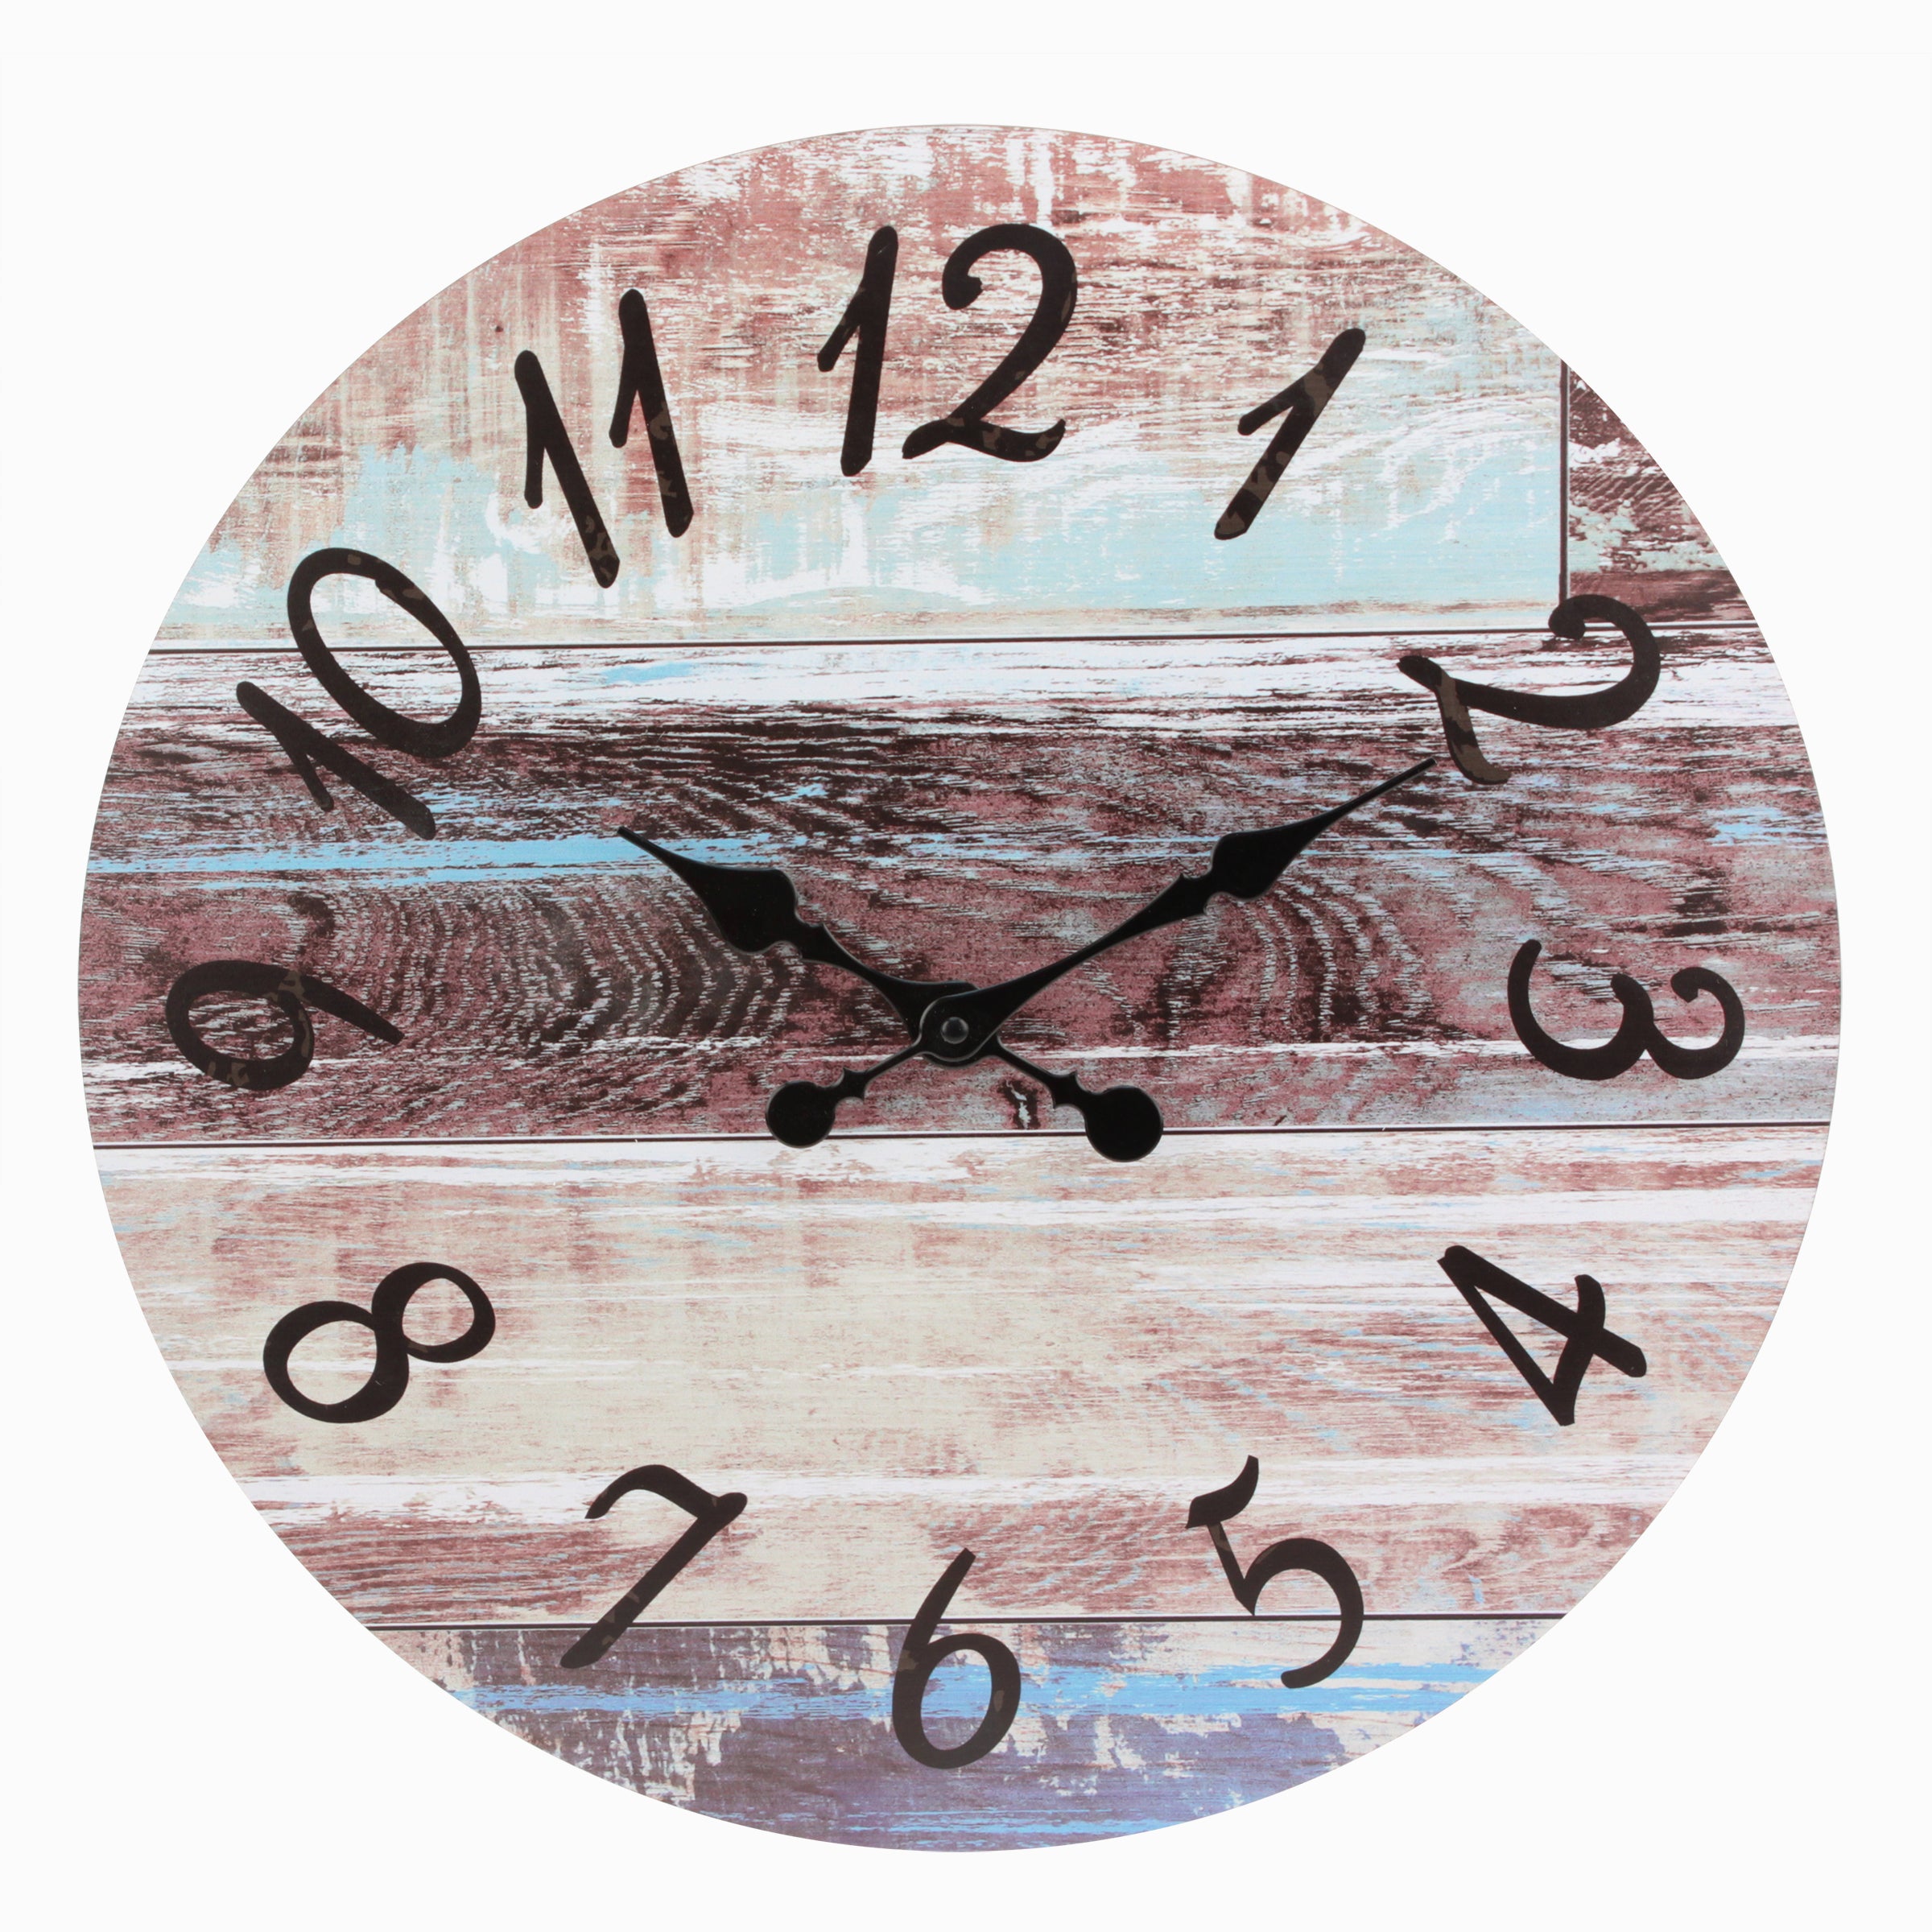 18” Round Rustic Wall Clock (WS)